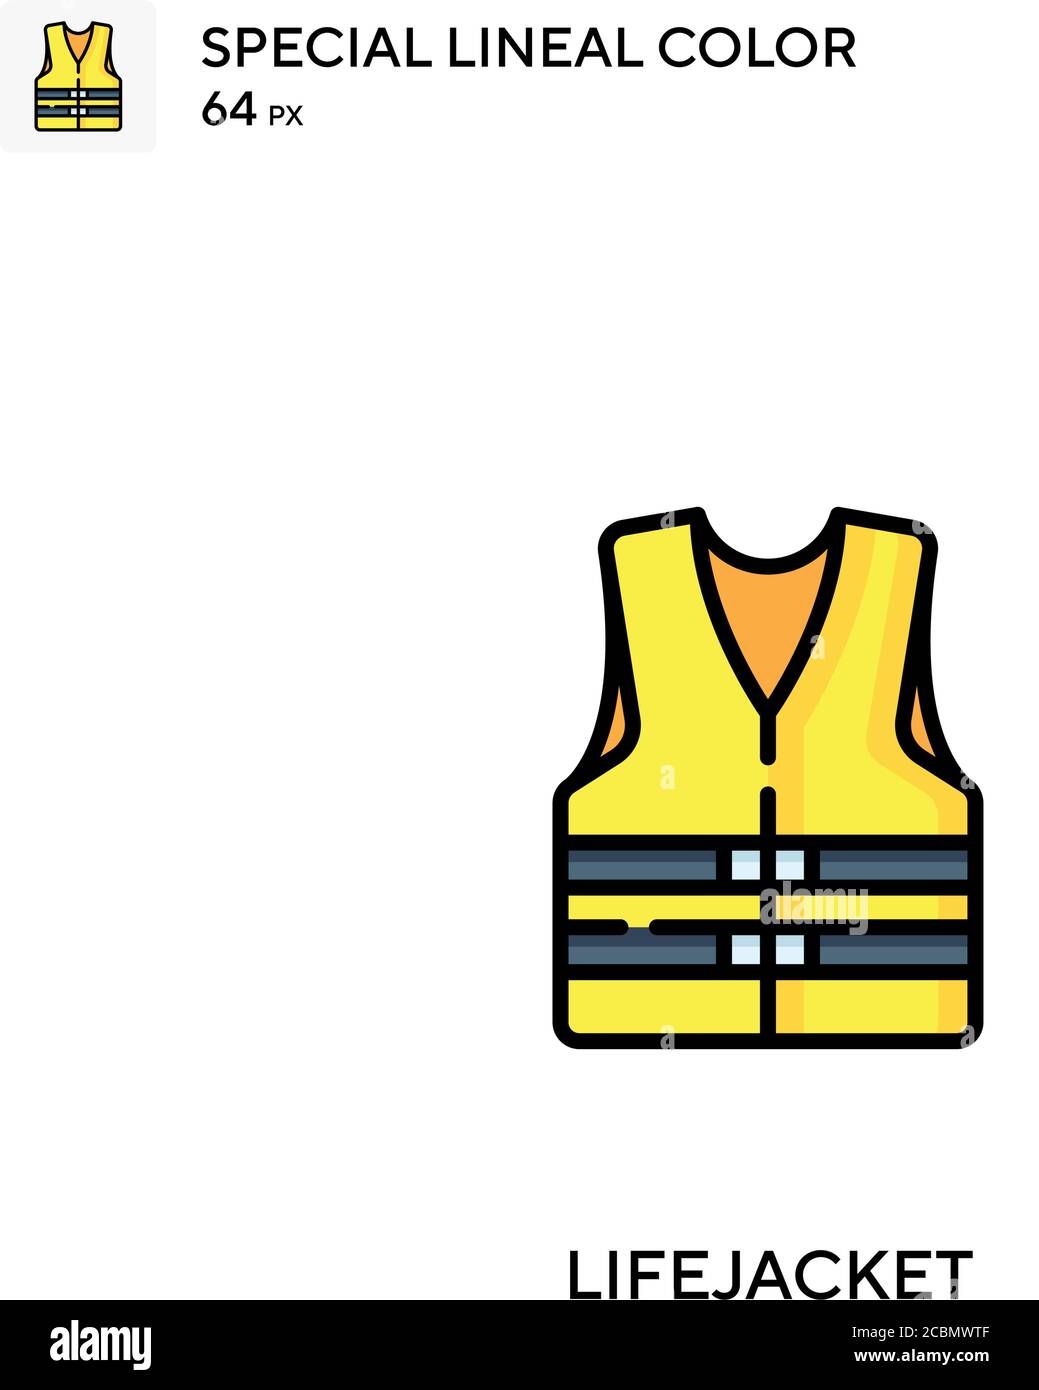 Lifejacket Special lineal color vector icon. Lifejacket icons for your business project Stock Vector